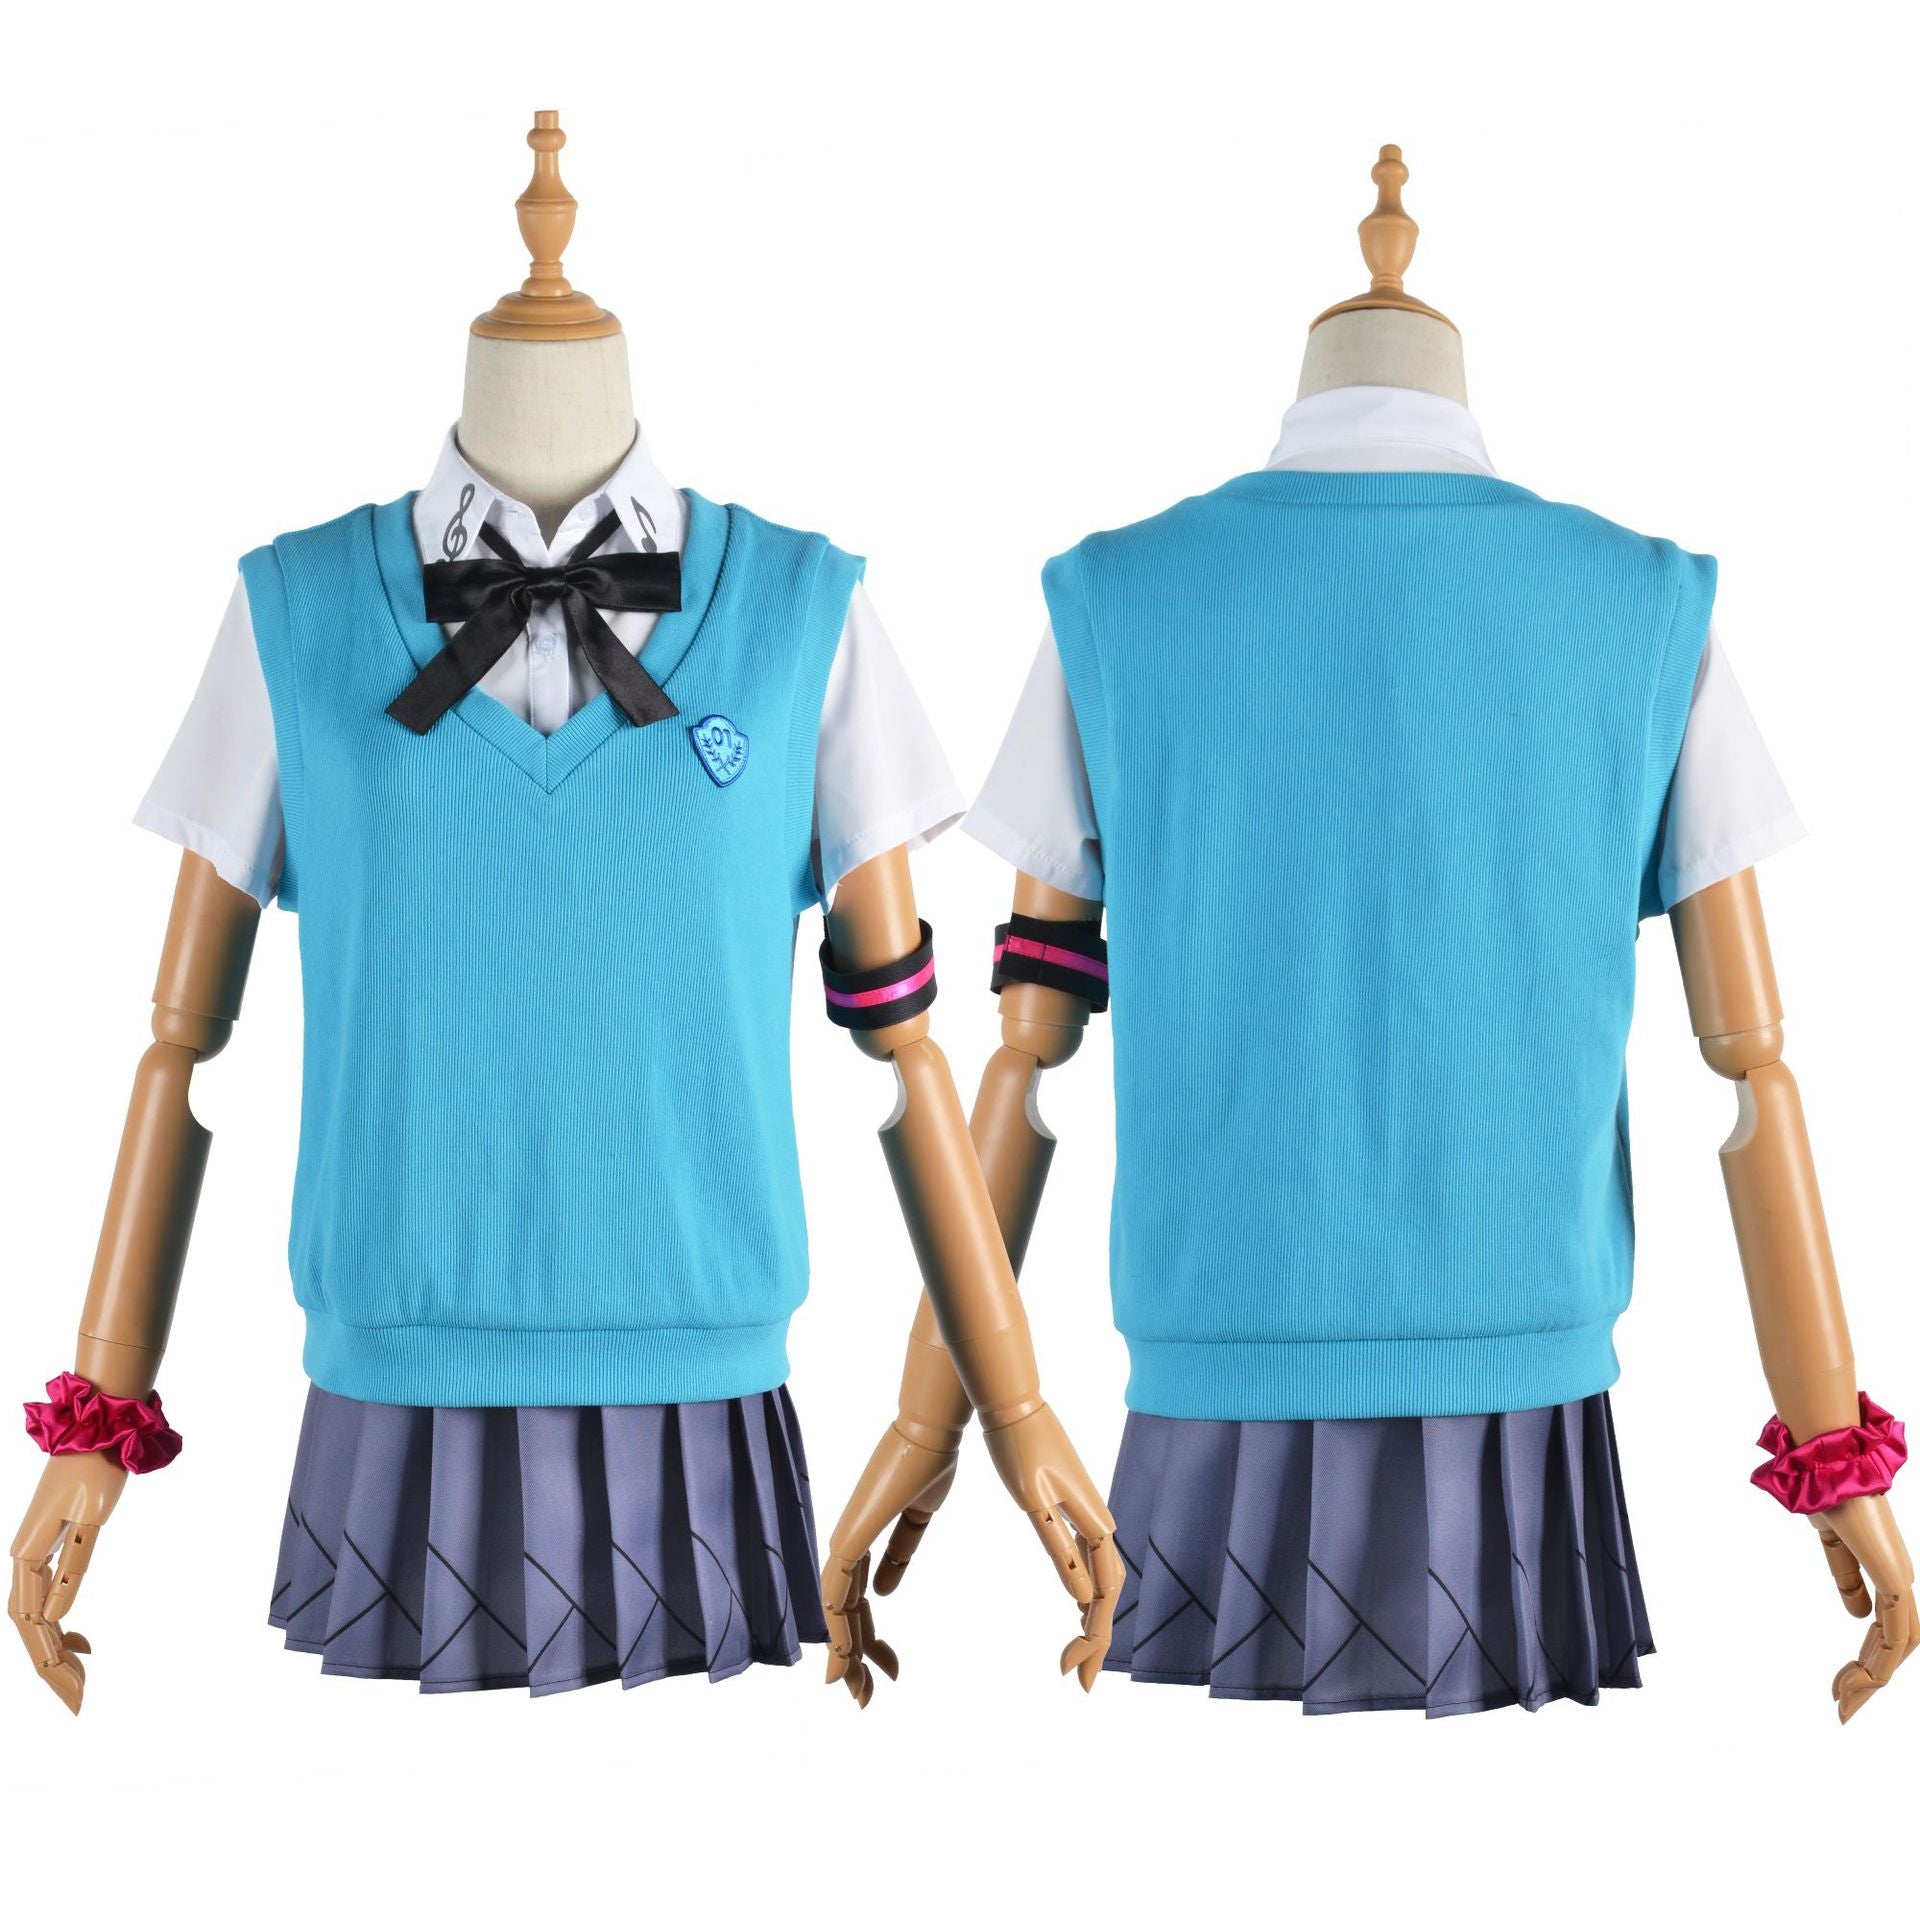 Rulercosplay Vocaloid Miku 16th Anniversary Cosplay Costume